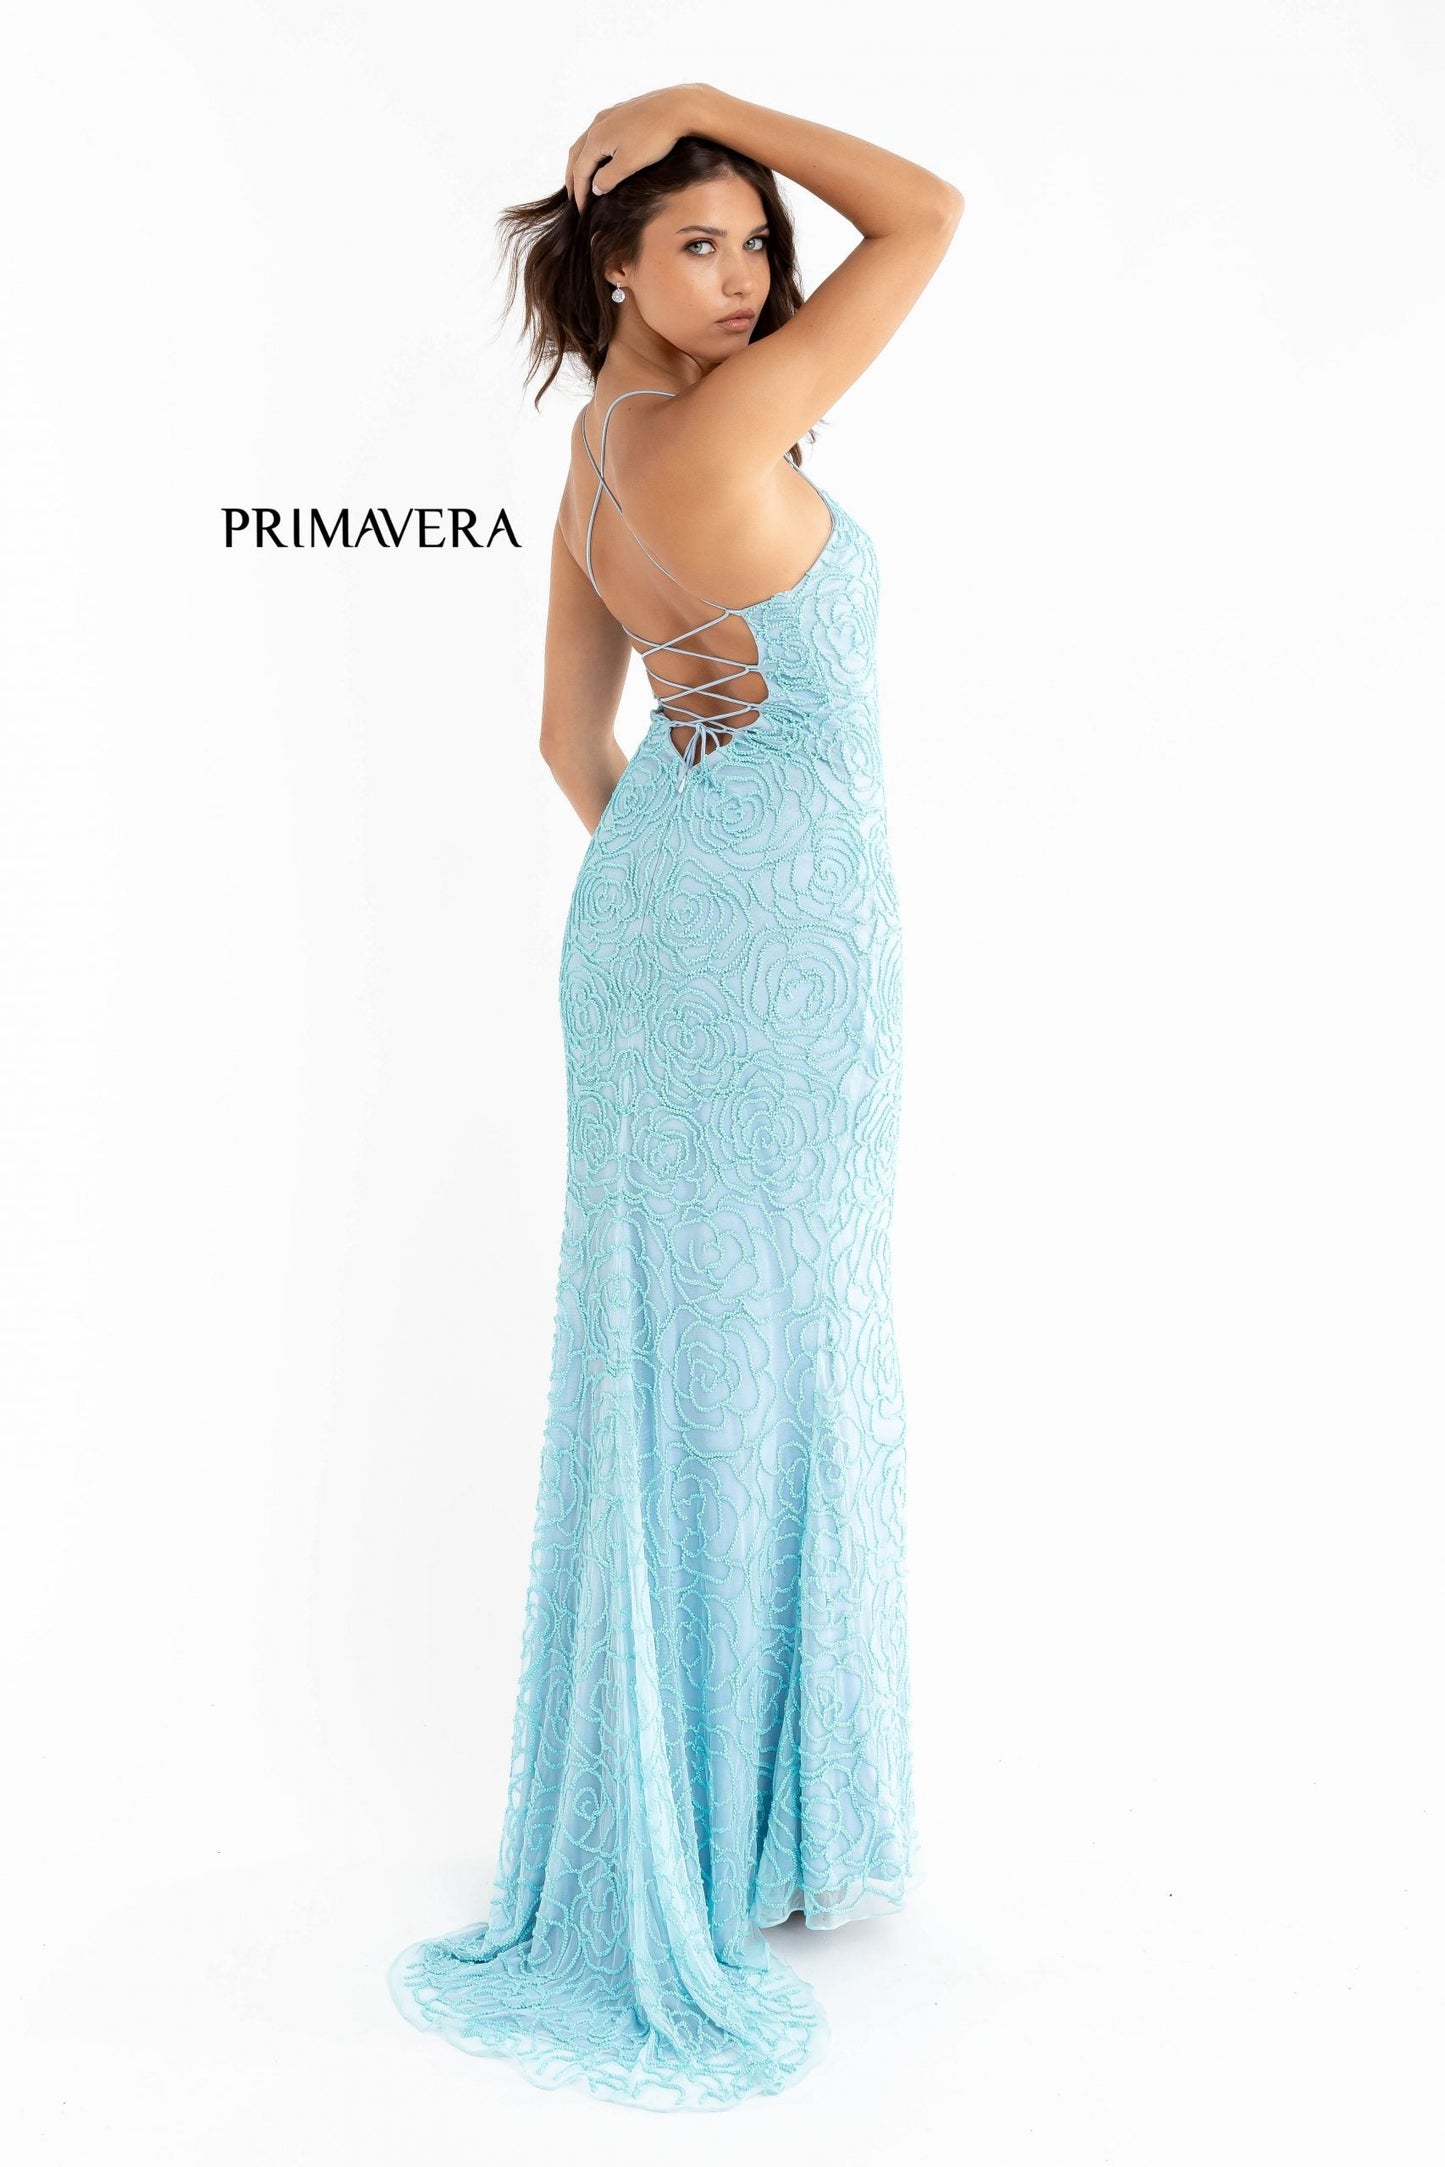 Primavera Couture 3638 Size 2 Bright Blue Long Fitted Floral Beaded Prom Dress Backless Formal Corset